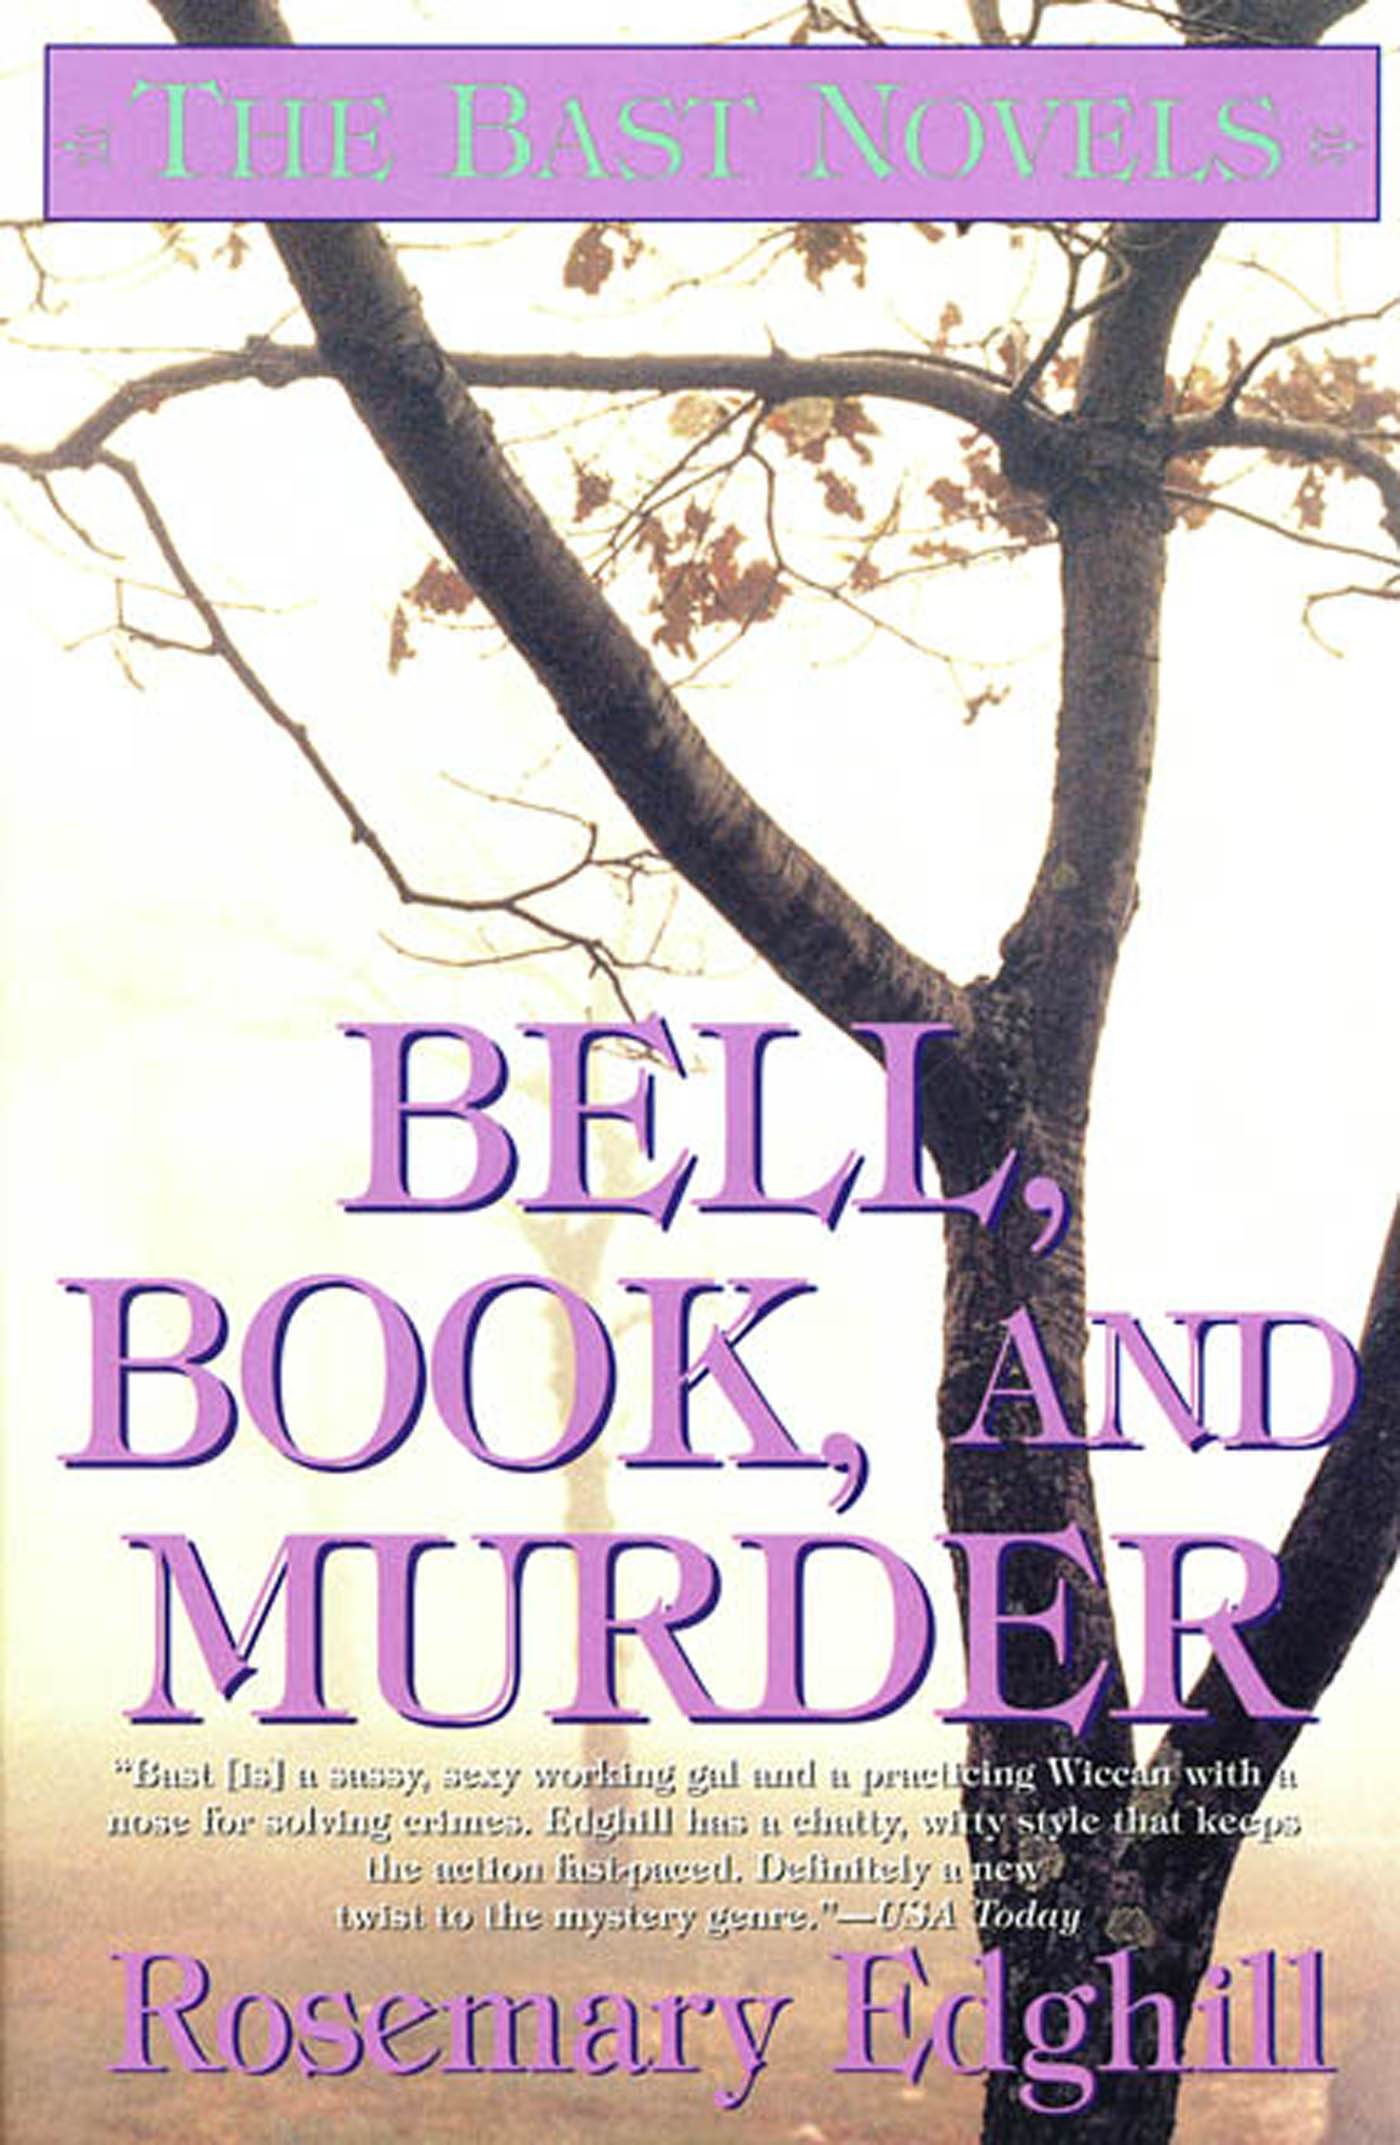 Bell, Book, and Murder : The Bast Mysteries (Speak Daggers To Her, Book of Moons, The Bowl of Night) by Rosemary Edghill